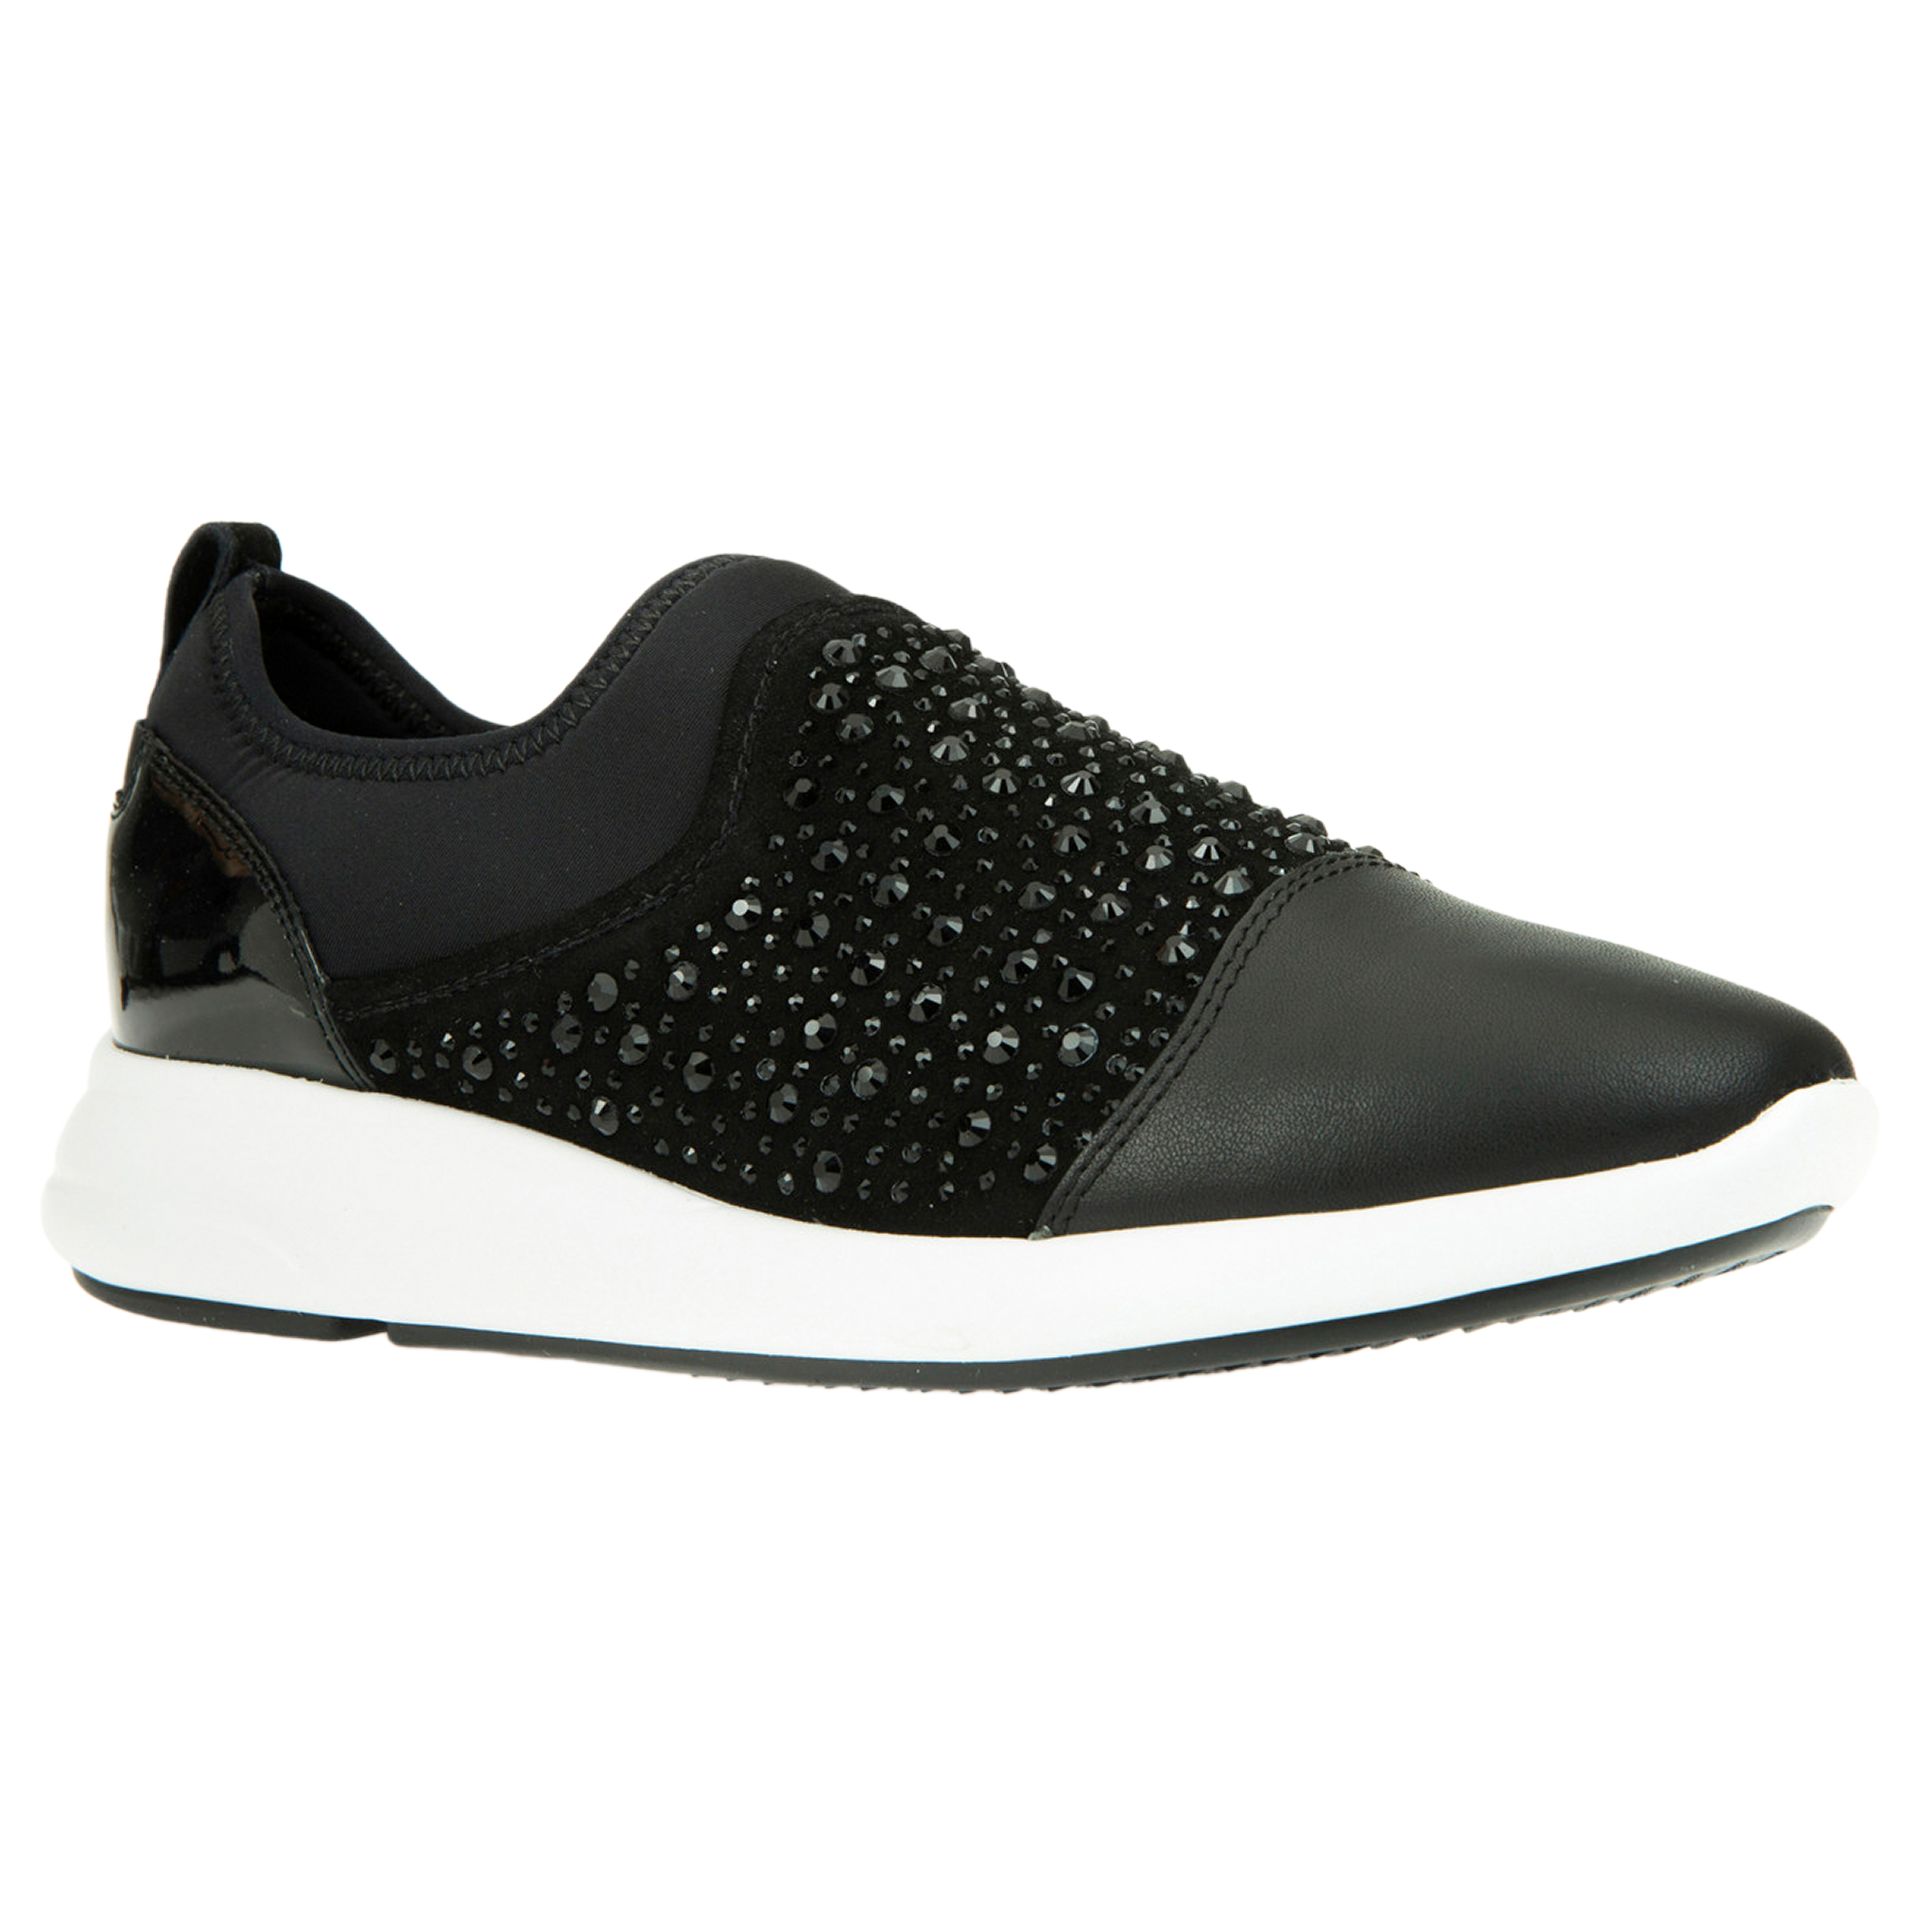 Geox Women's Ophira Breathable Slip On Trainers, Black